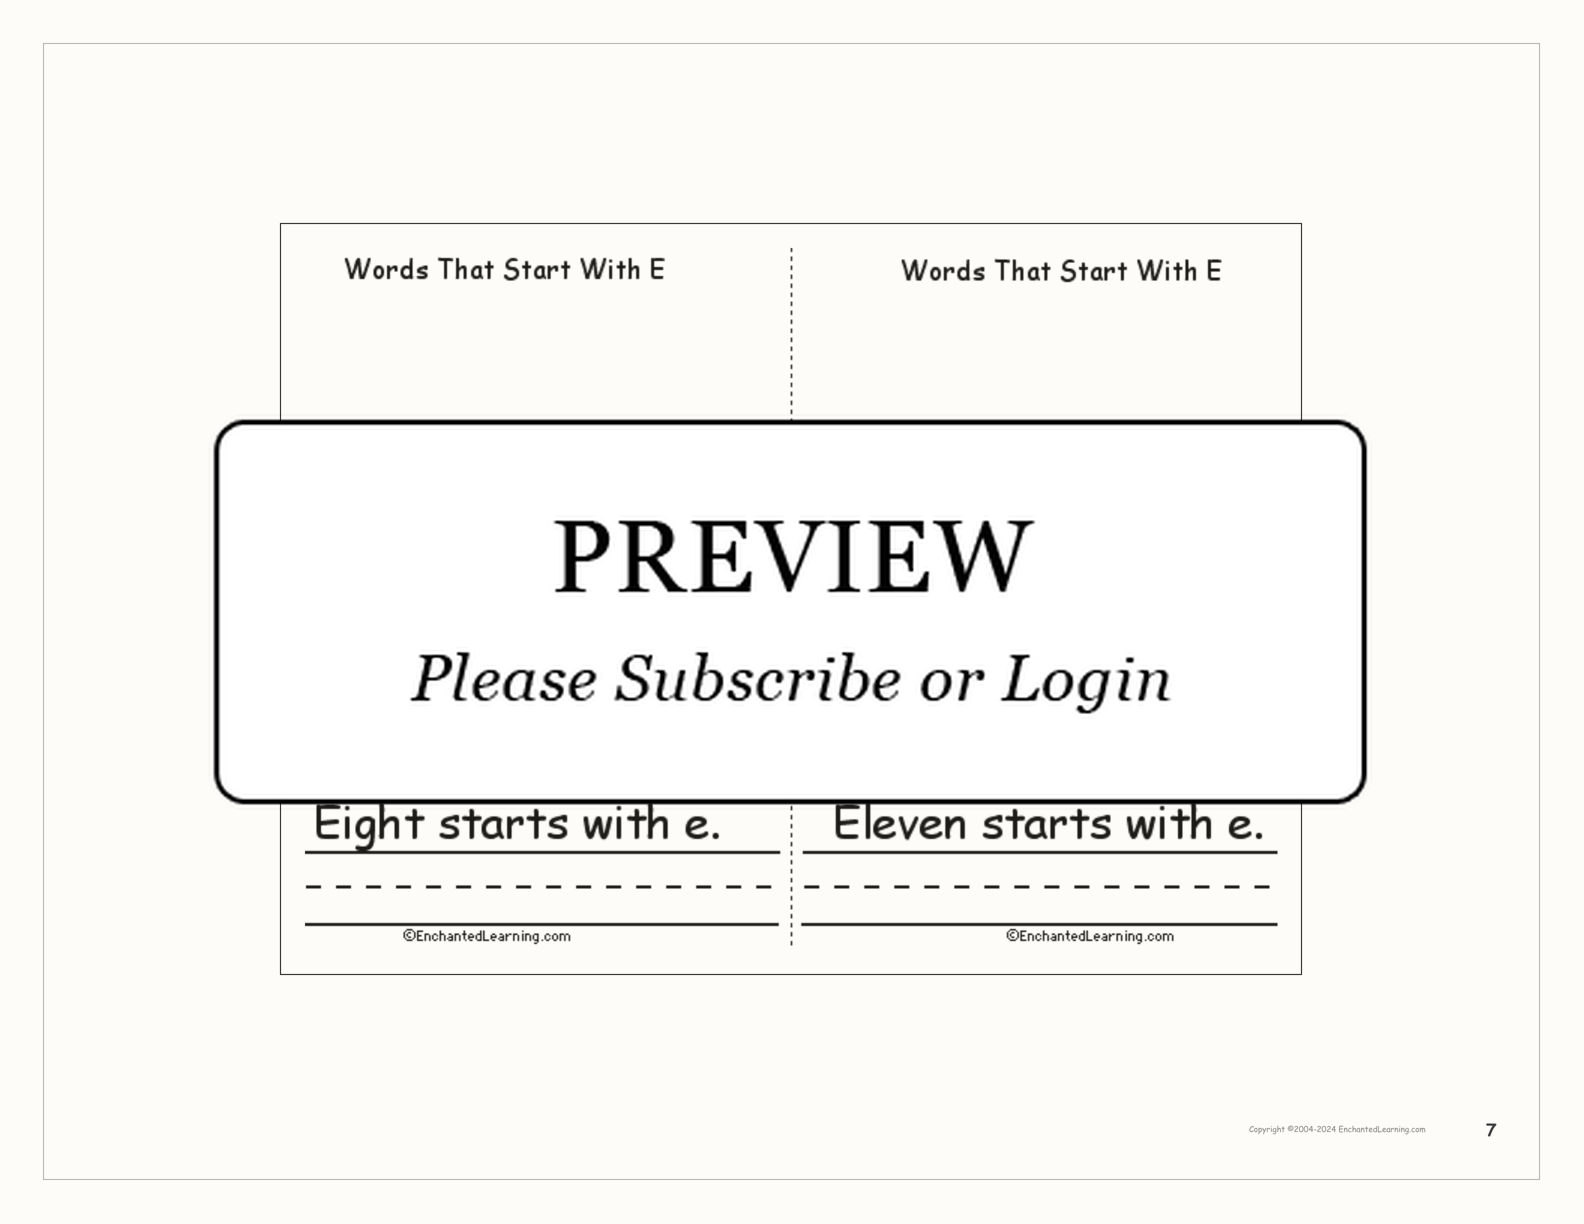 Words That Start With E interactive worksheet page 7